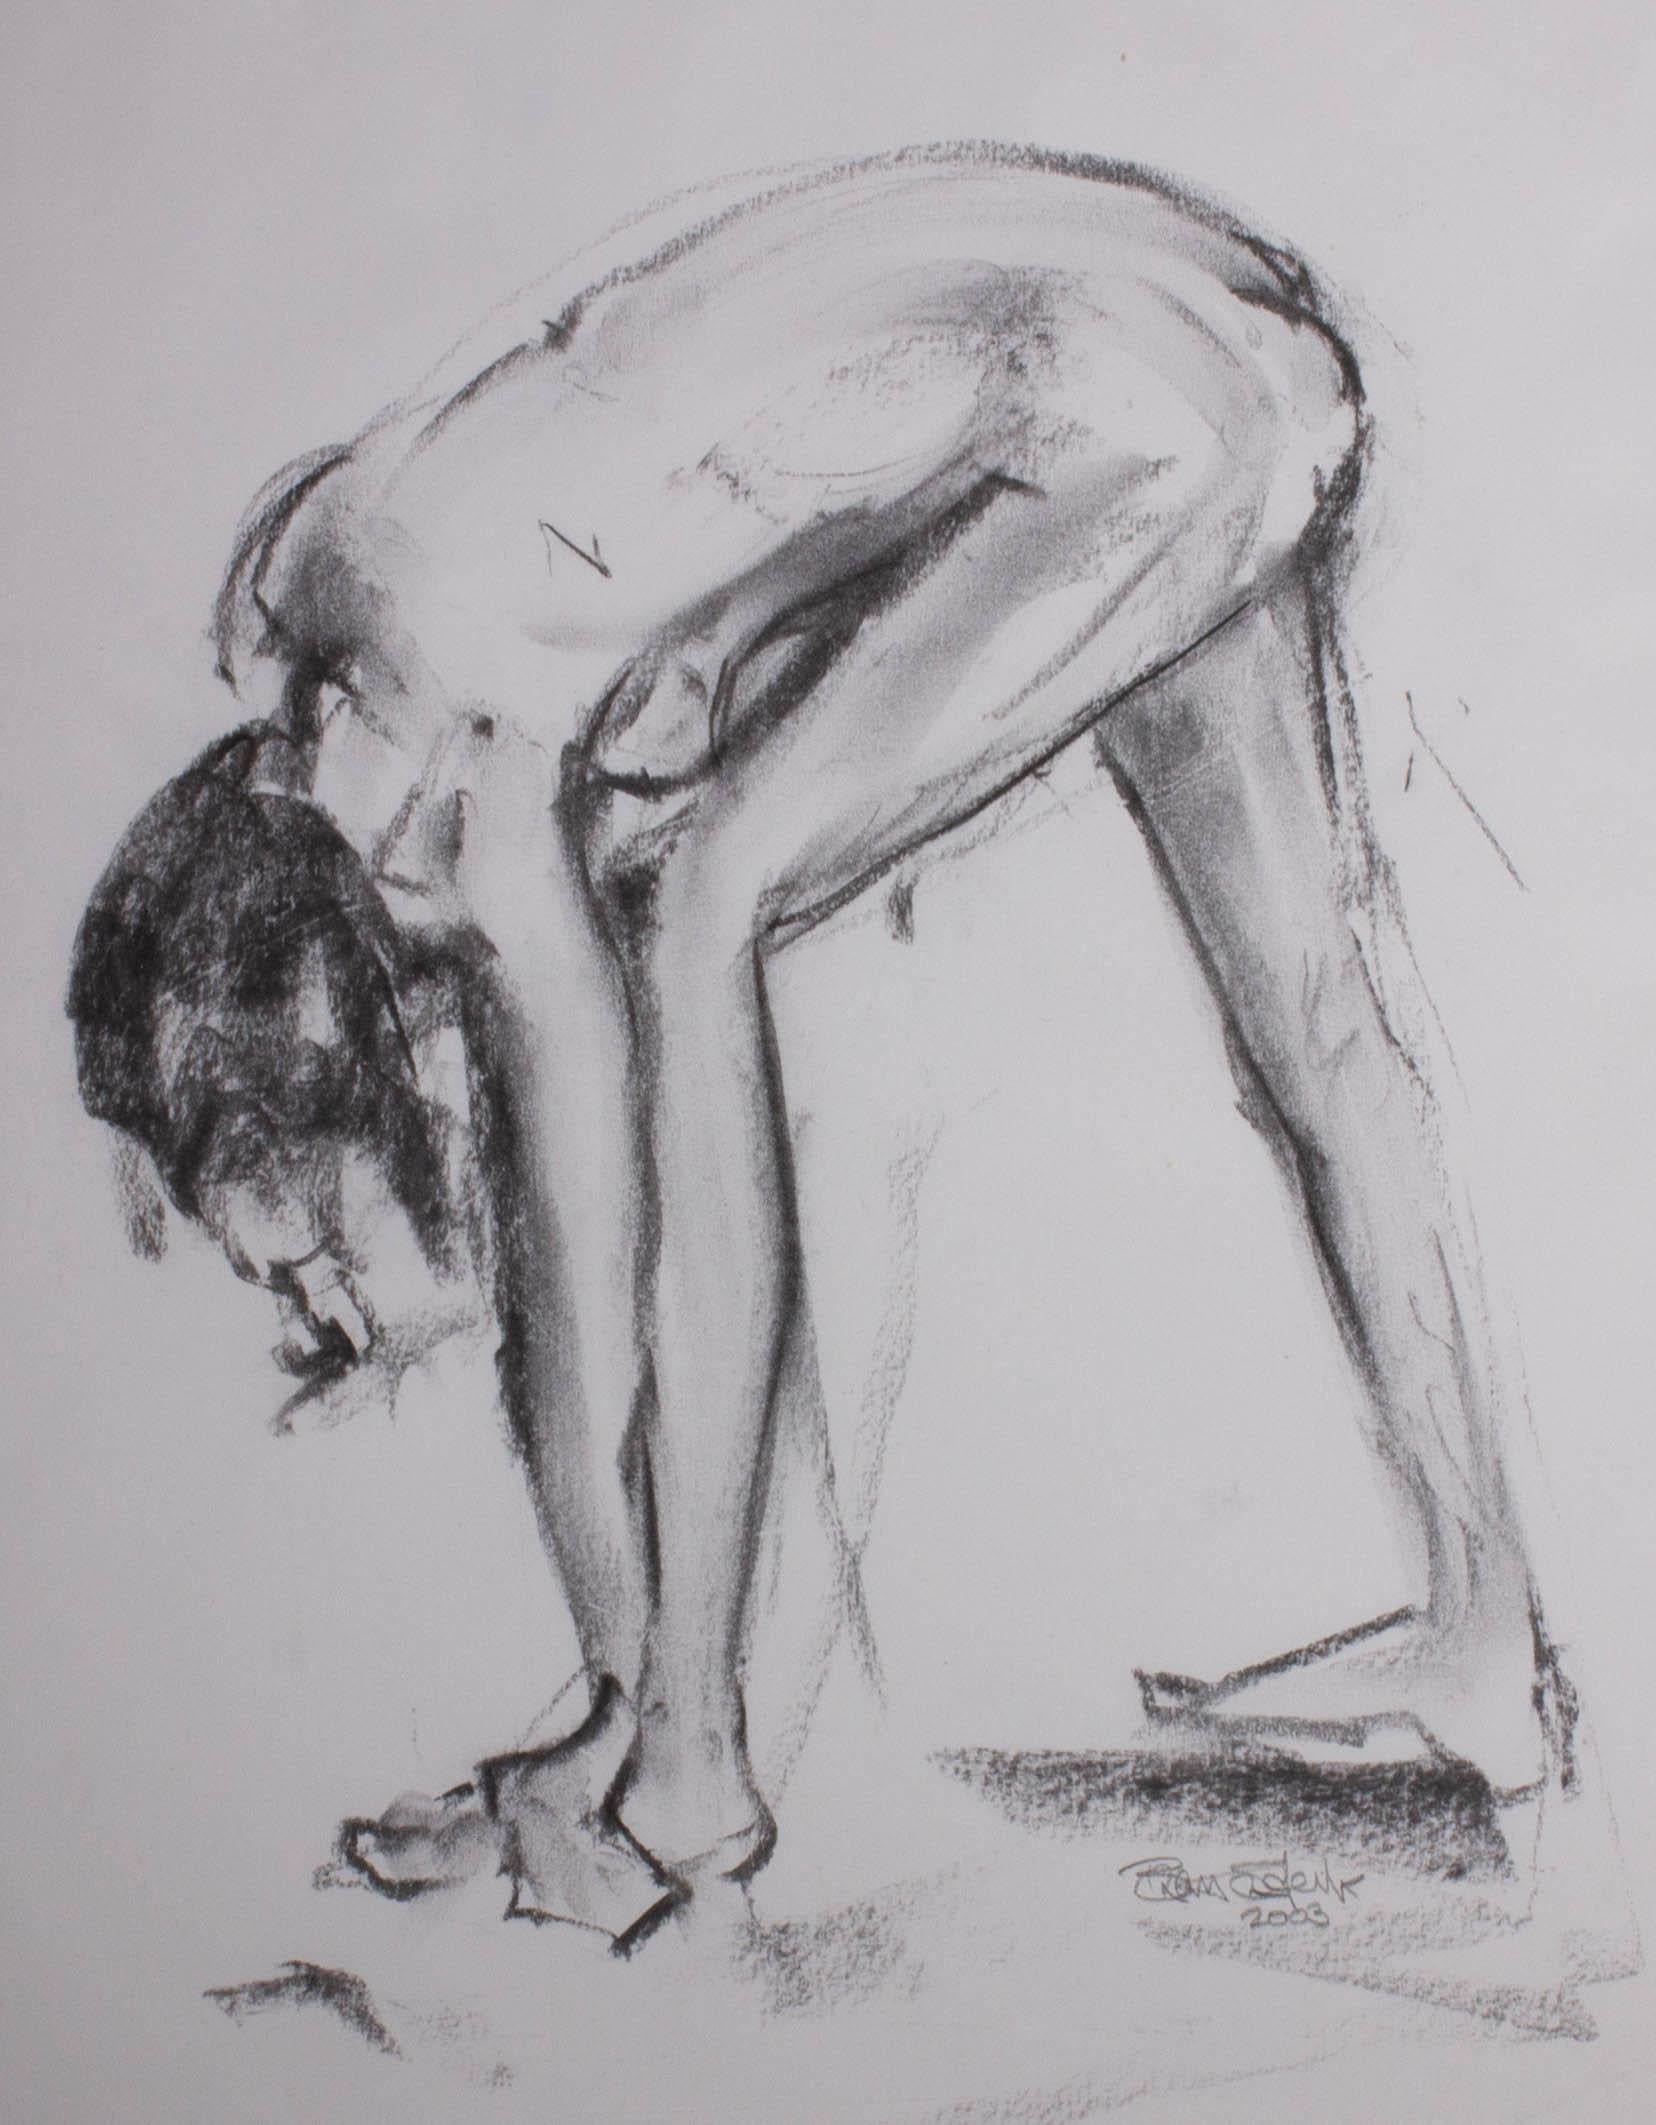 2003 Charcoal Drawing - Nude Study - Art by Unknown